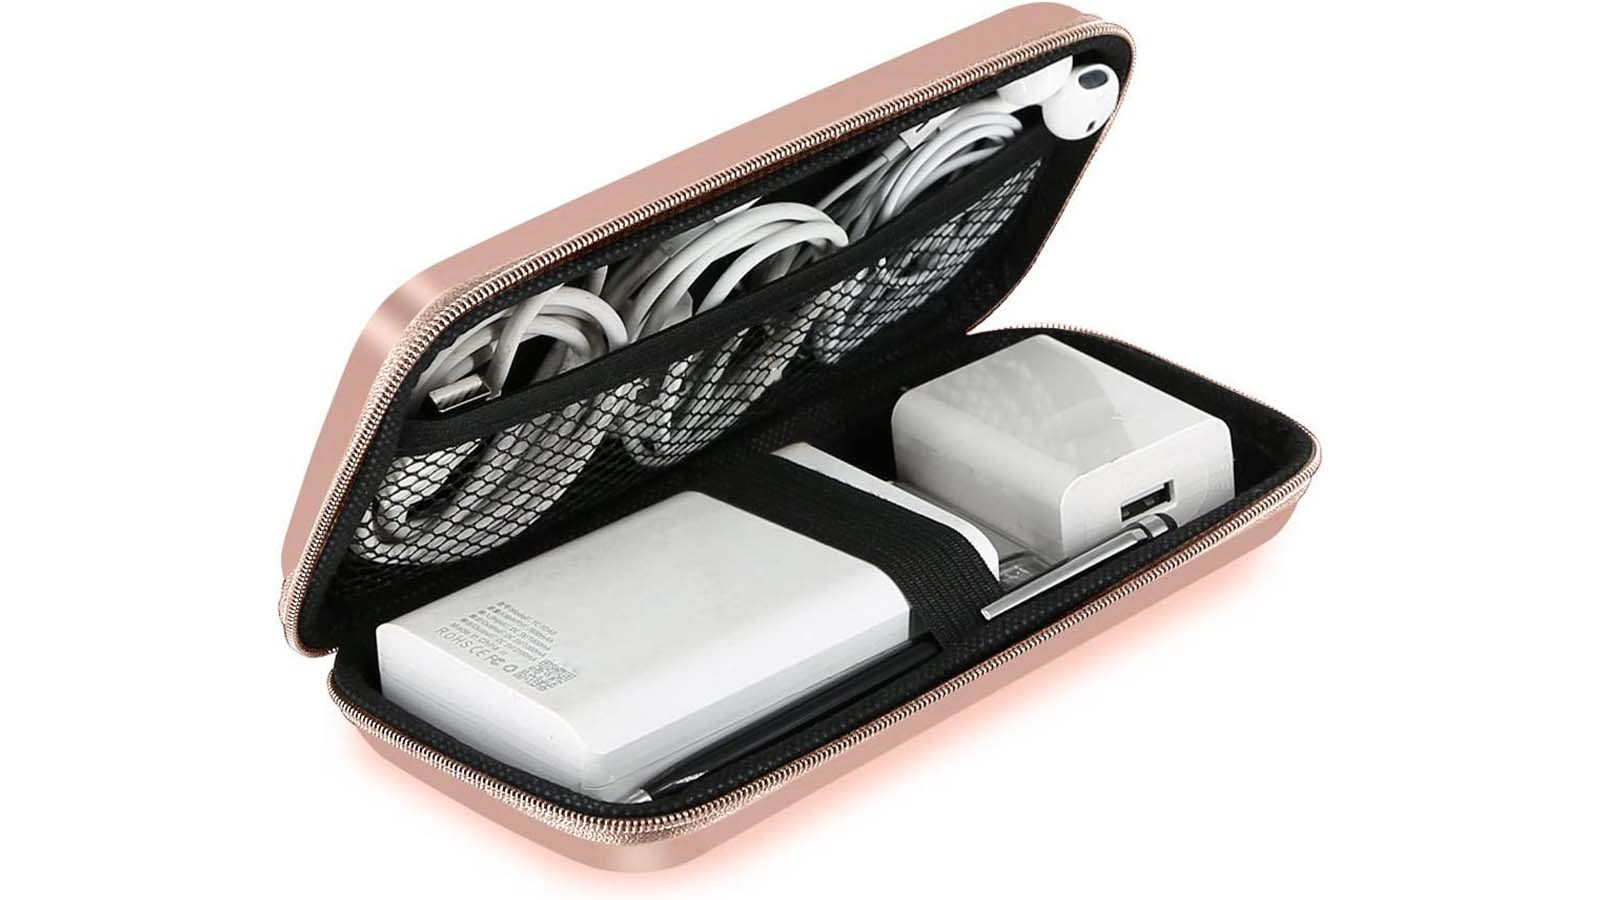 Travel Electronic Accessories Organizer, Storage Handbag Cable Organizer  Bag Waterproof Carry Pouch for 11.6 Laptop,Tablet,Power